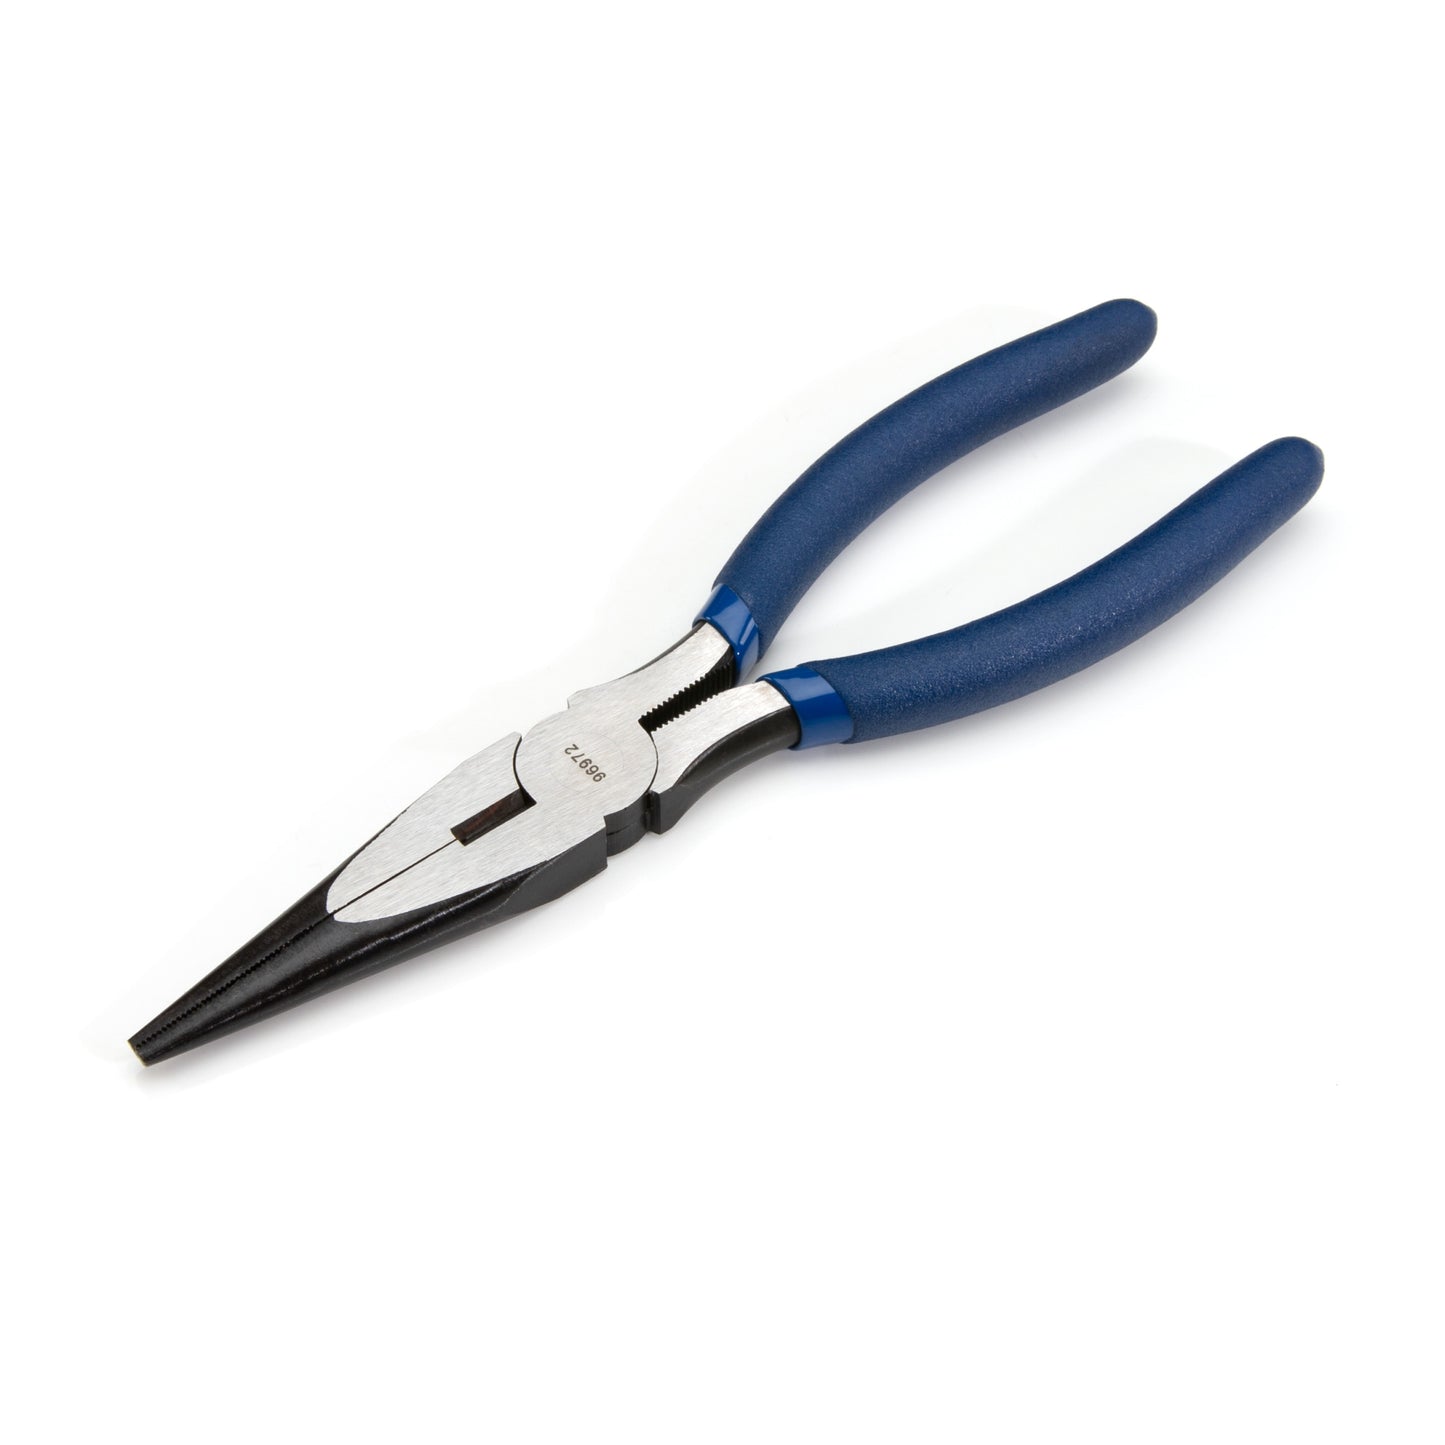 Steelman 8-Inch Long Needle Nose Pliers With Wire Cutter